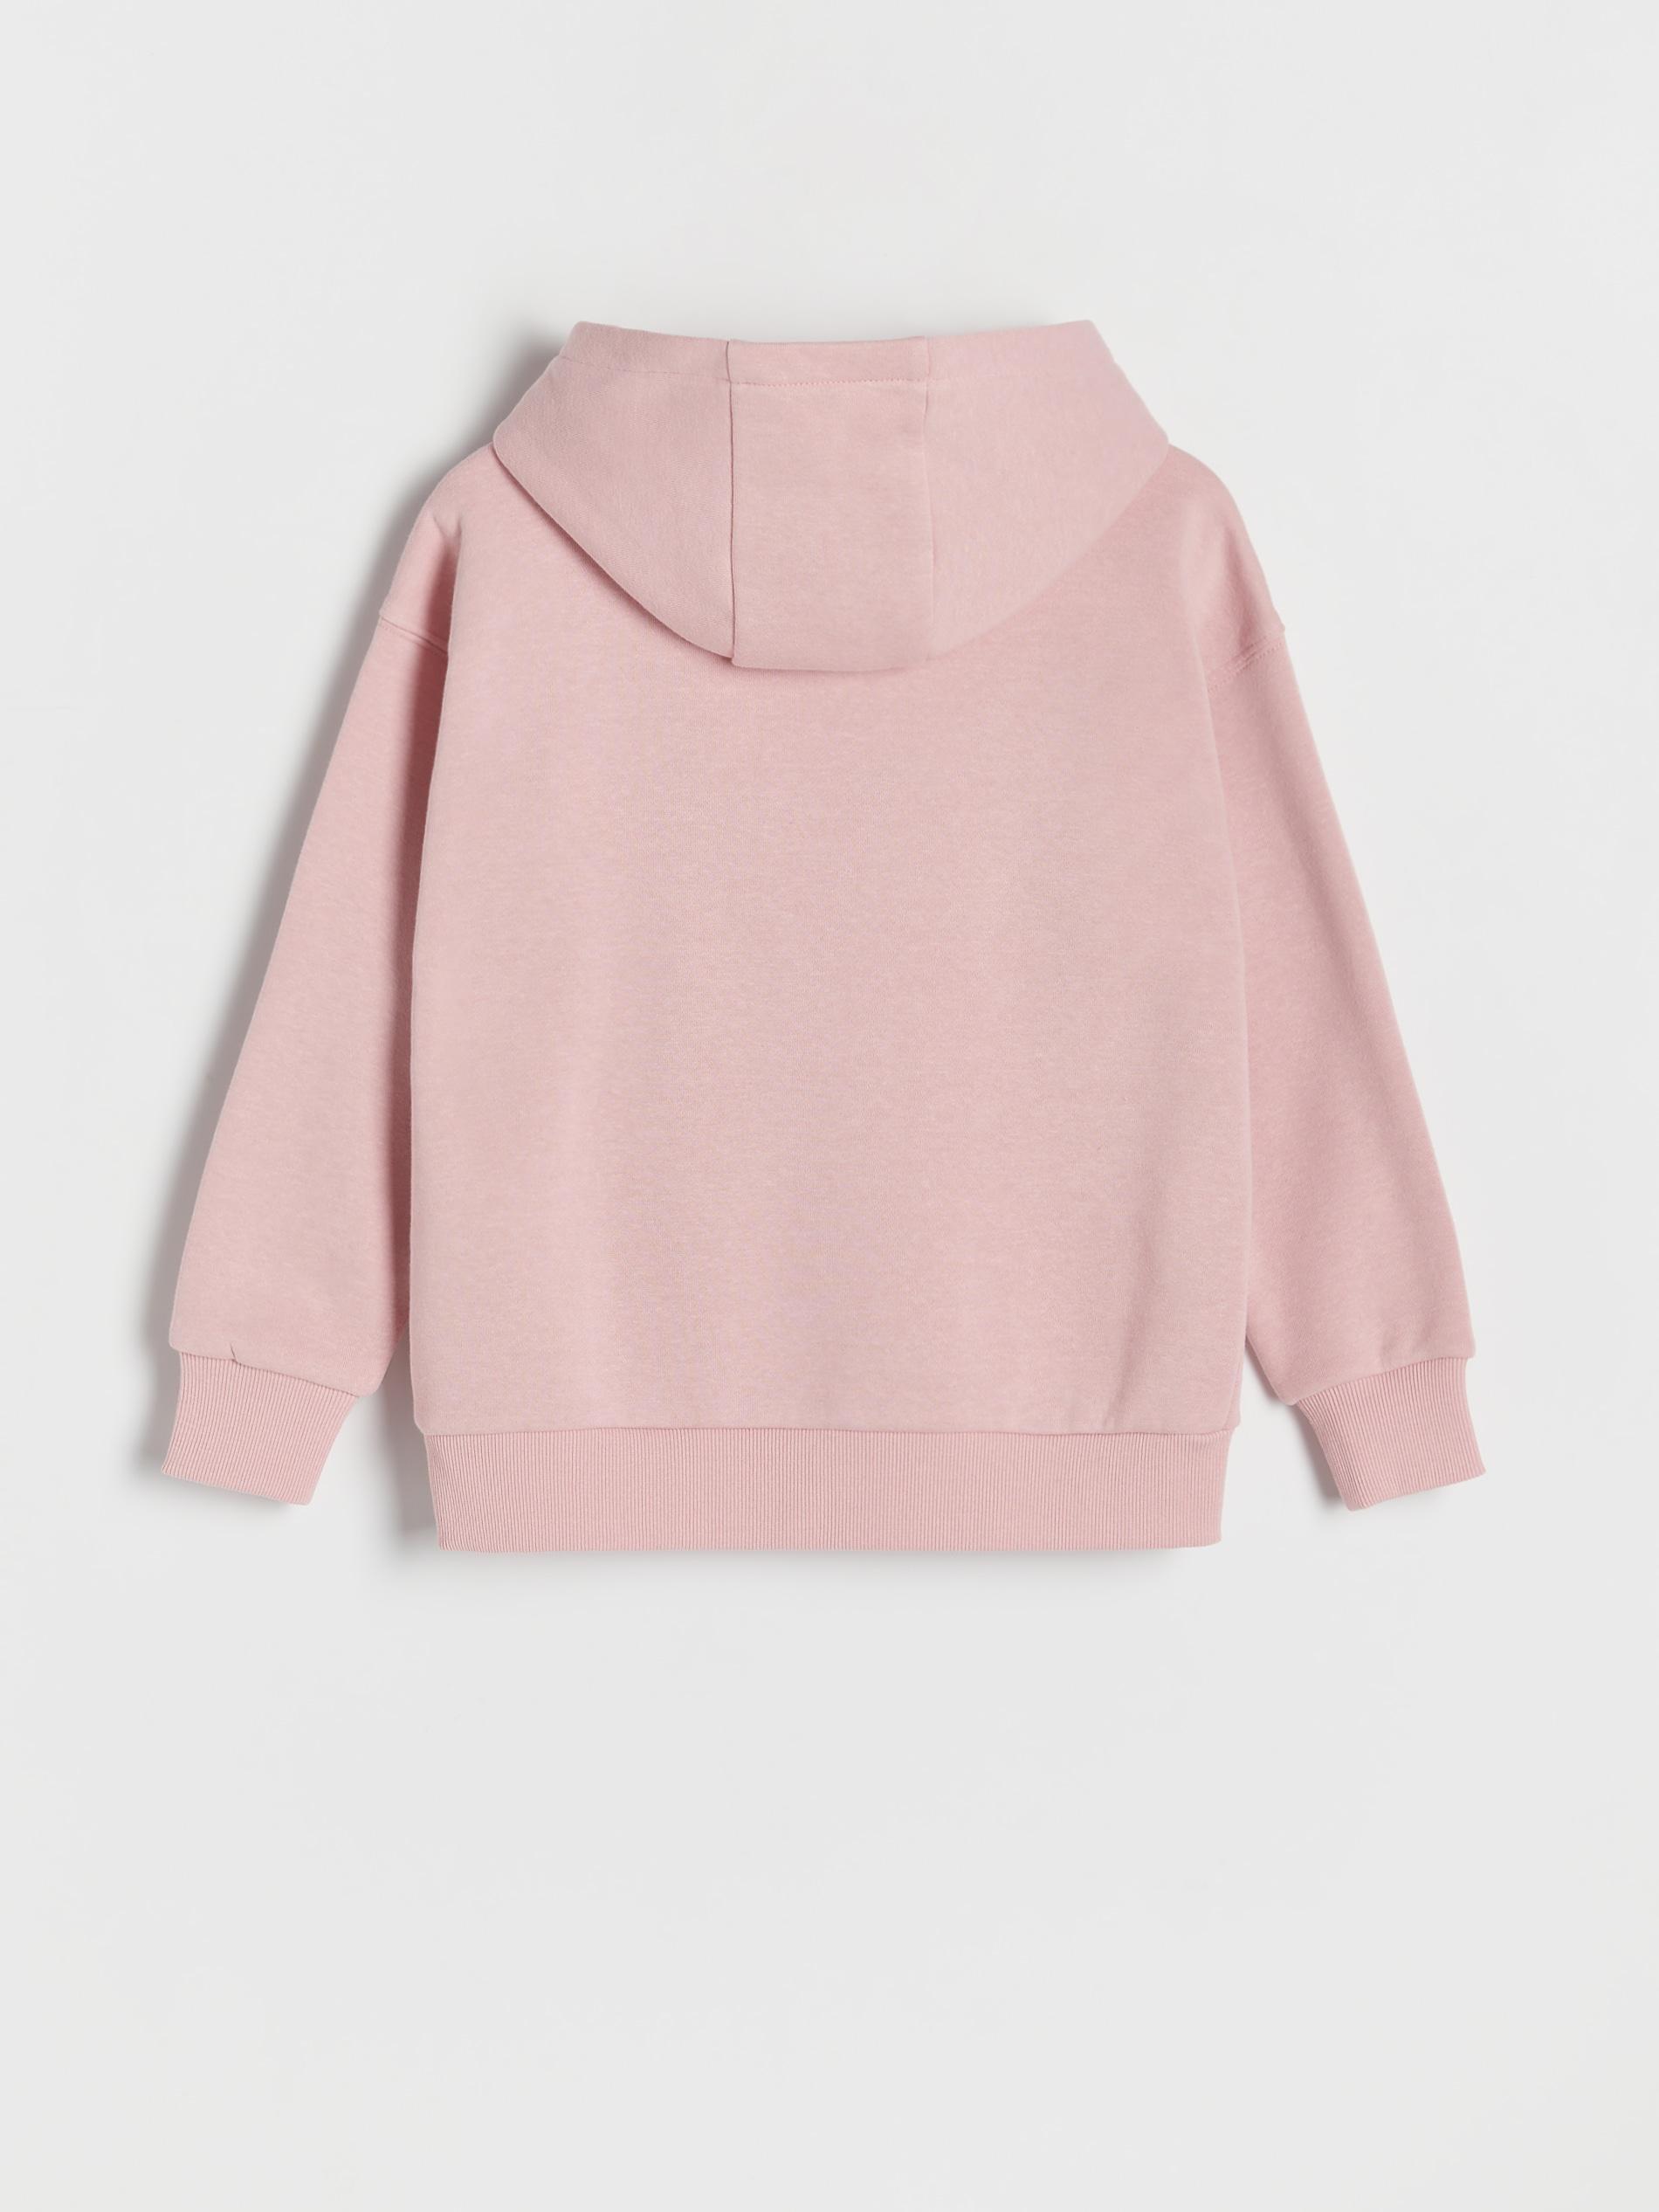 Reserved - Pink Oversized Hoodie, Kids Girls